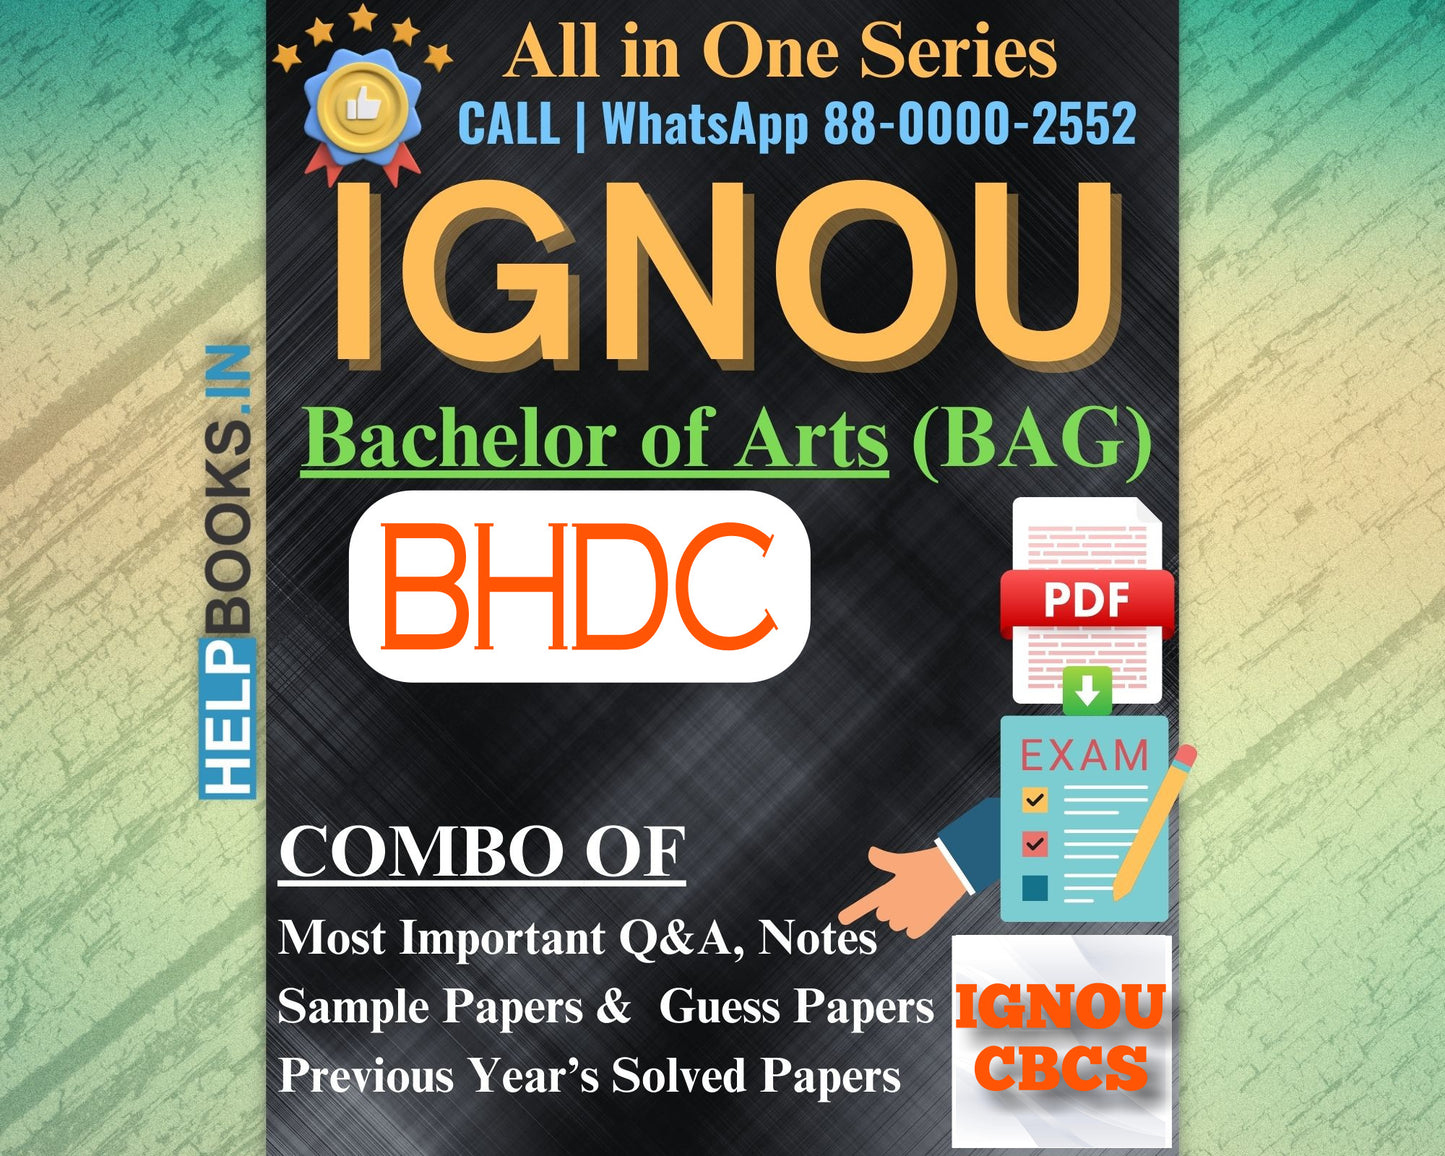 IGNOU BAG Online Study Package: Bachelor of Arts (BA) - Previous Years Solved Papers, Q&A, Exam Notes, Sample Papers, Guess Papers-BHDC131, BHDC132, BHDC133, BHDC134